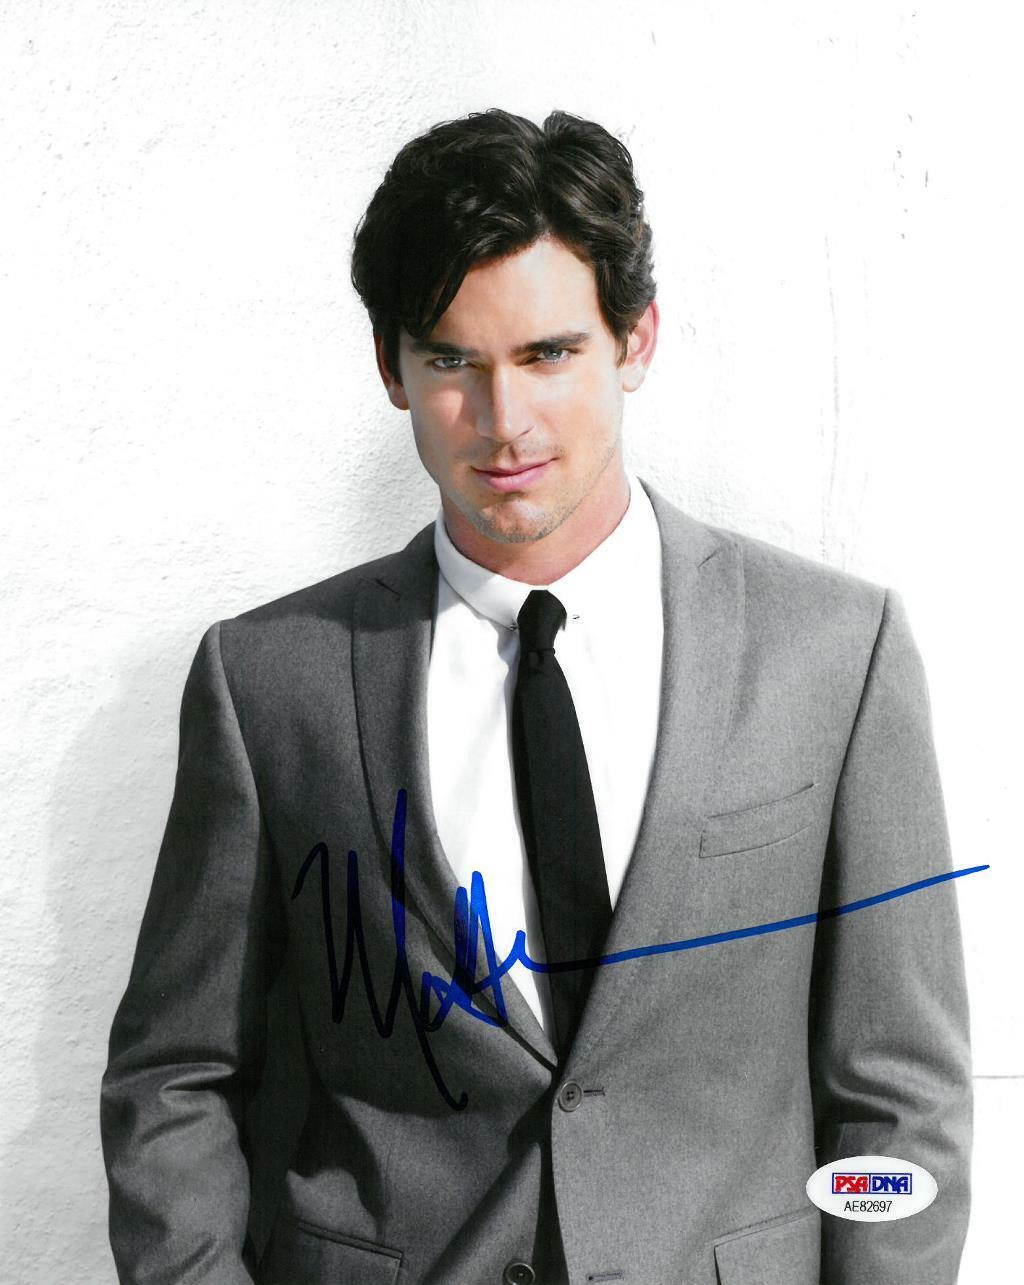 Matt Bomer Signed Authentic Autographed 8x10 Photo Poster painting PSA/DNA #AE82697